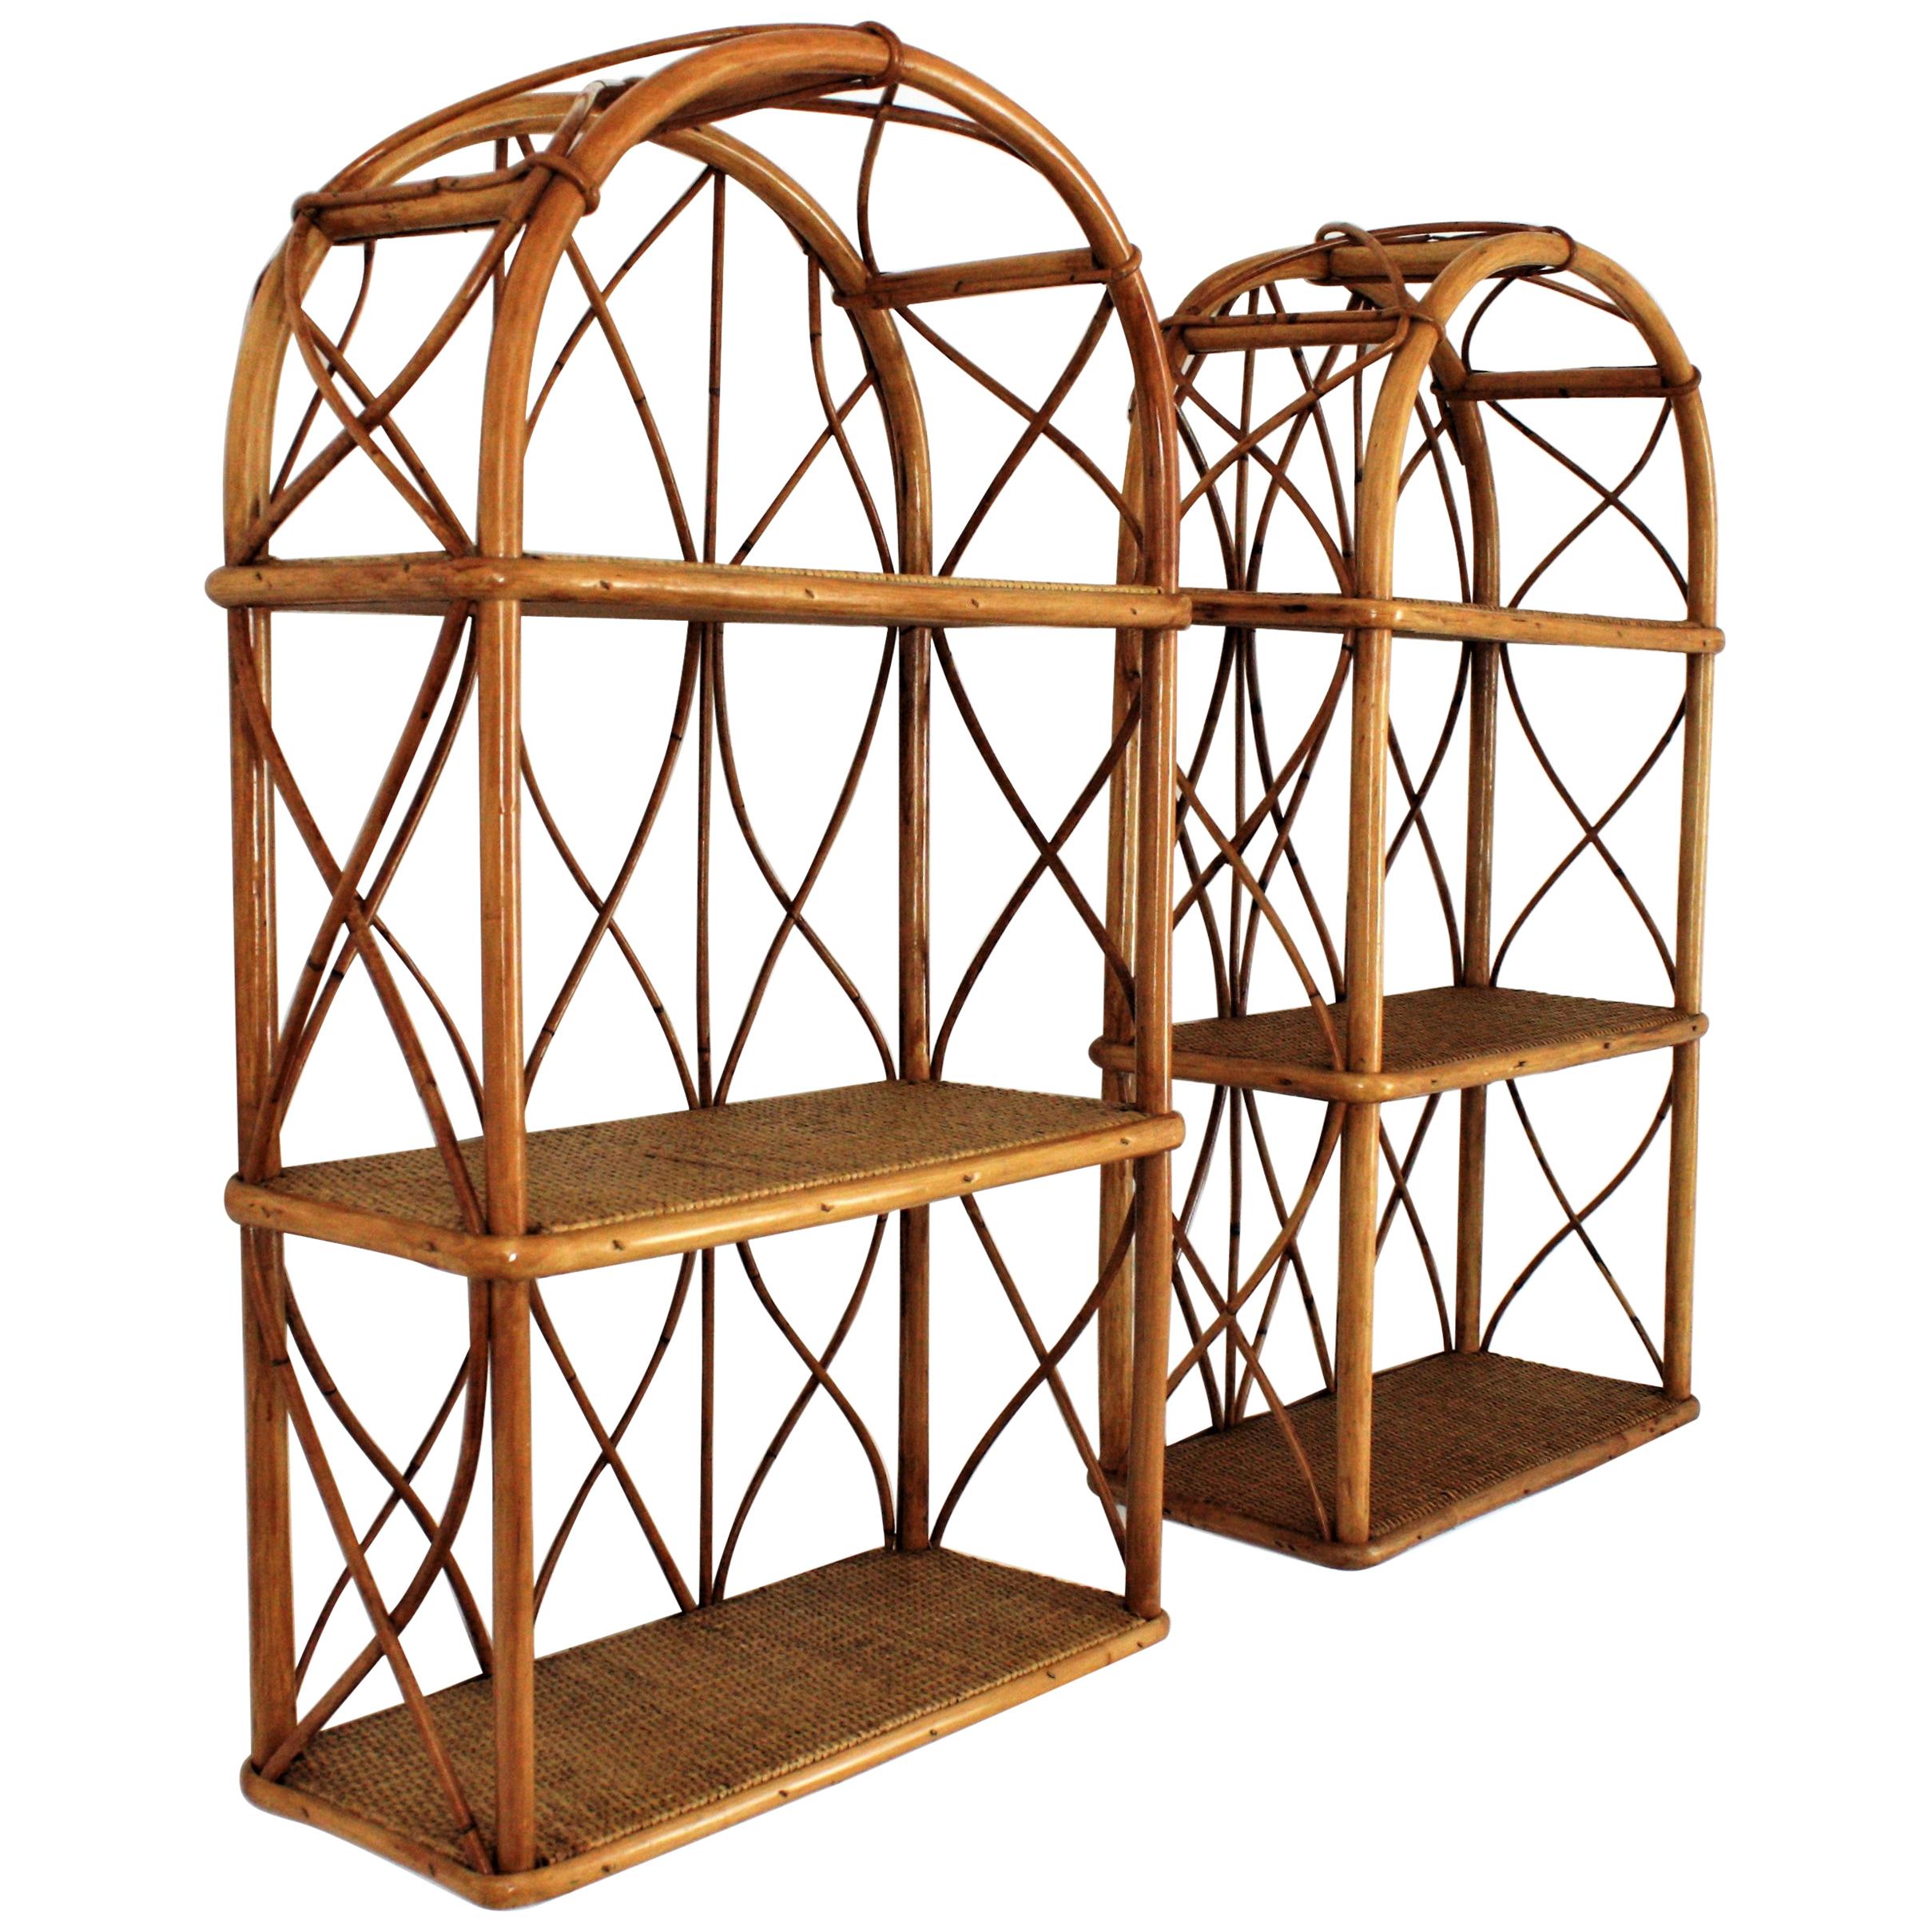 Pair of Bamboo and Rattan Wall Shelves with Round Tops